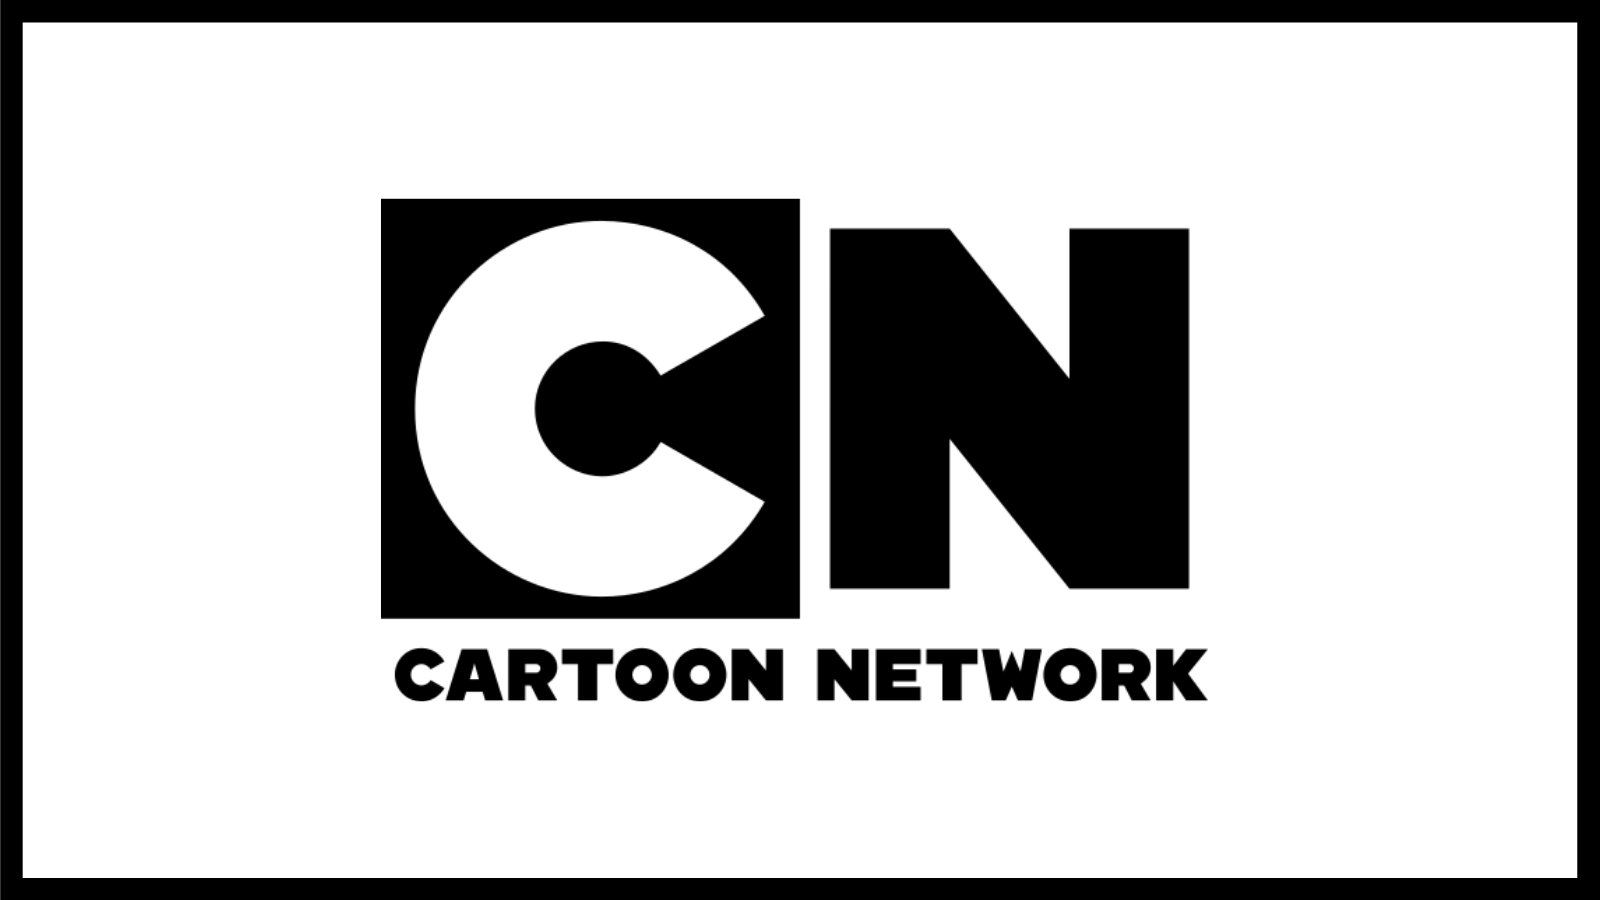 How to Watch 'Cartoon Network' Online Without Cable - TechNadu